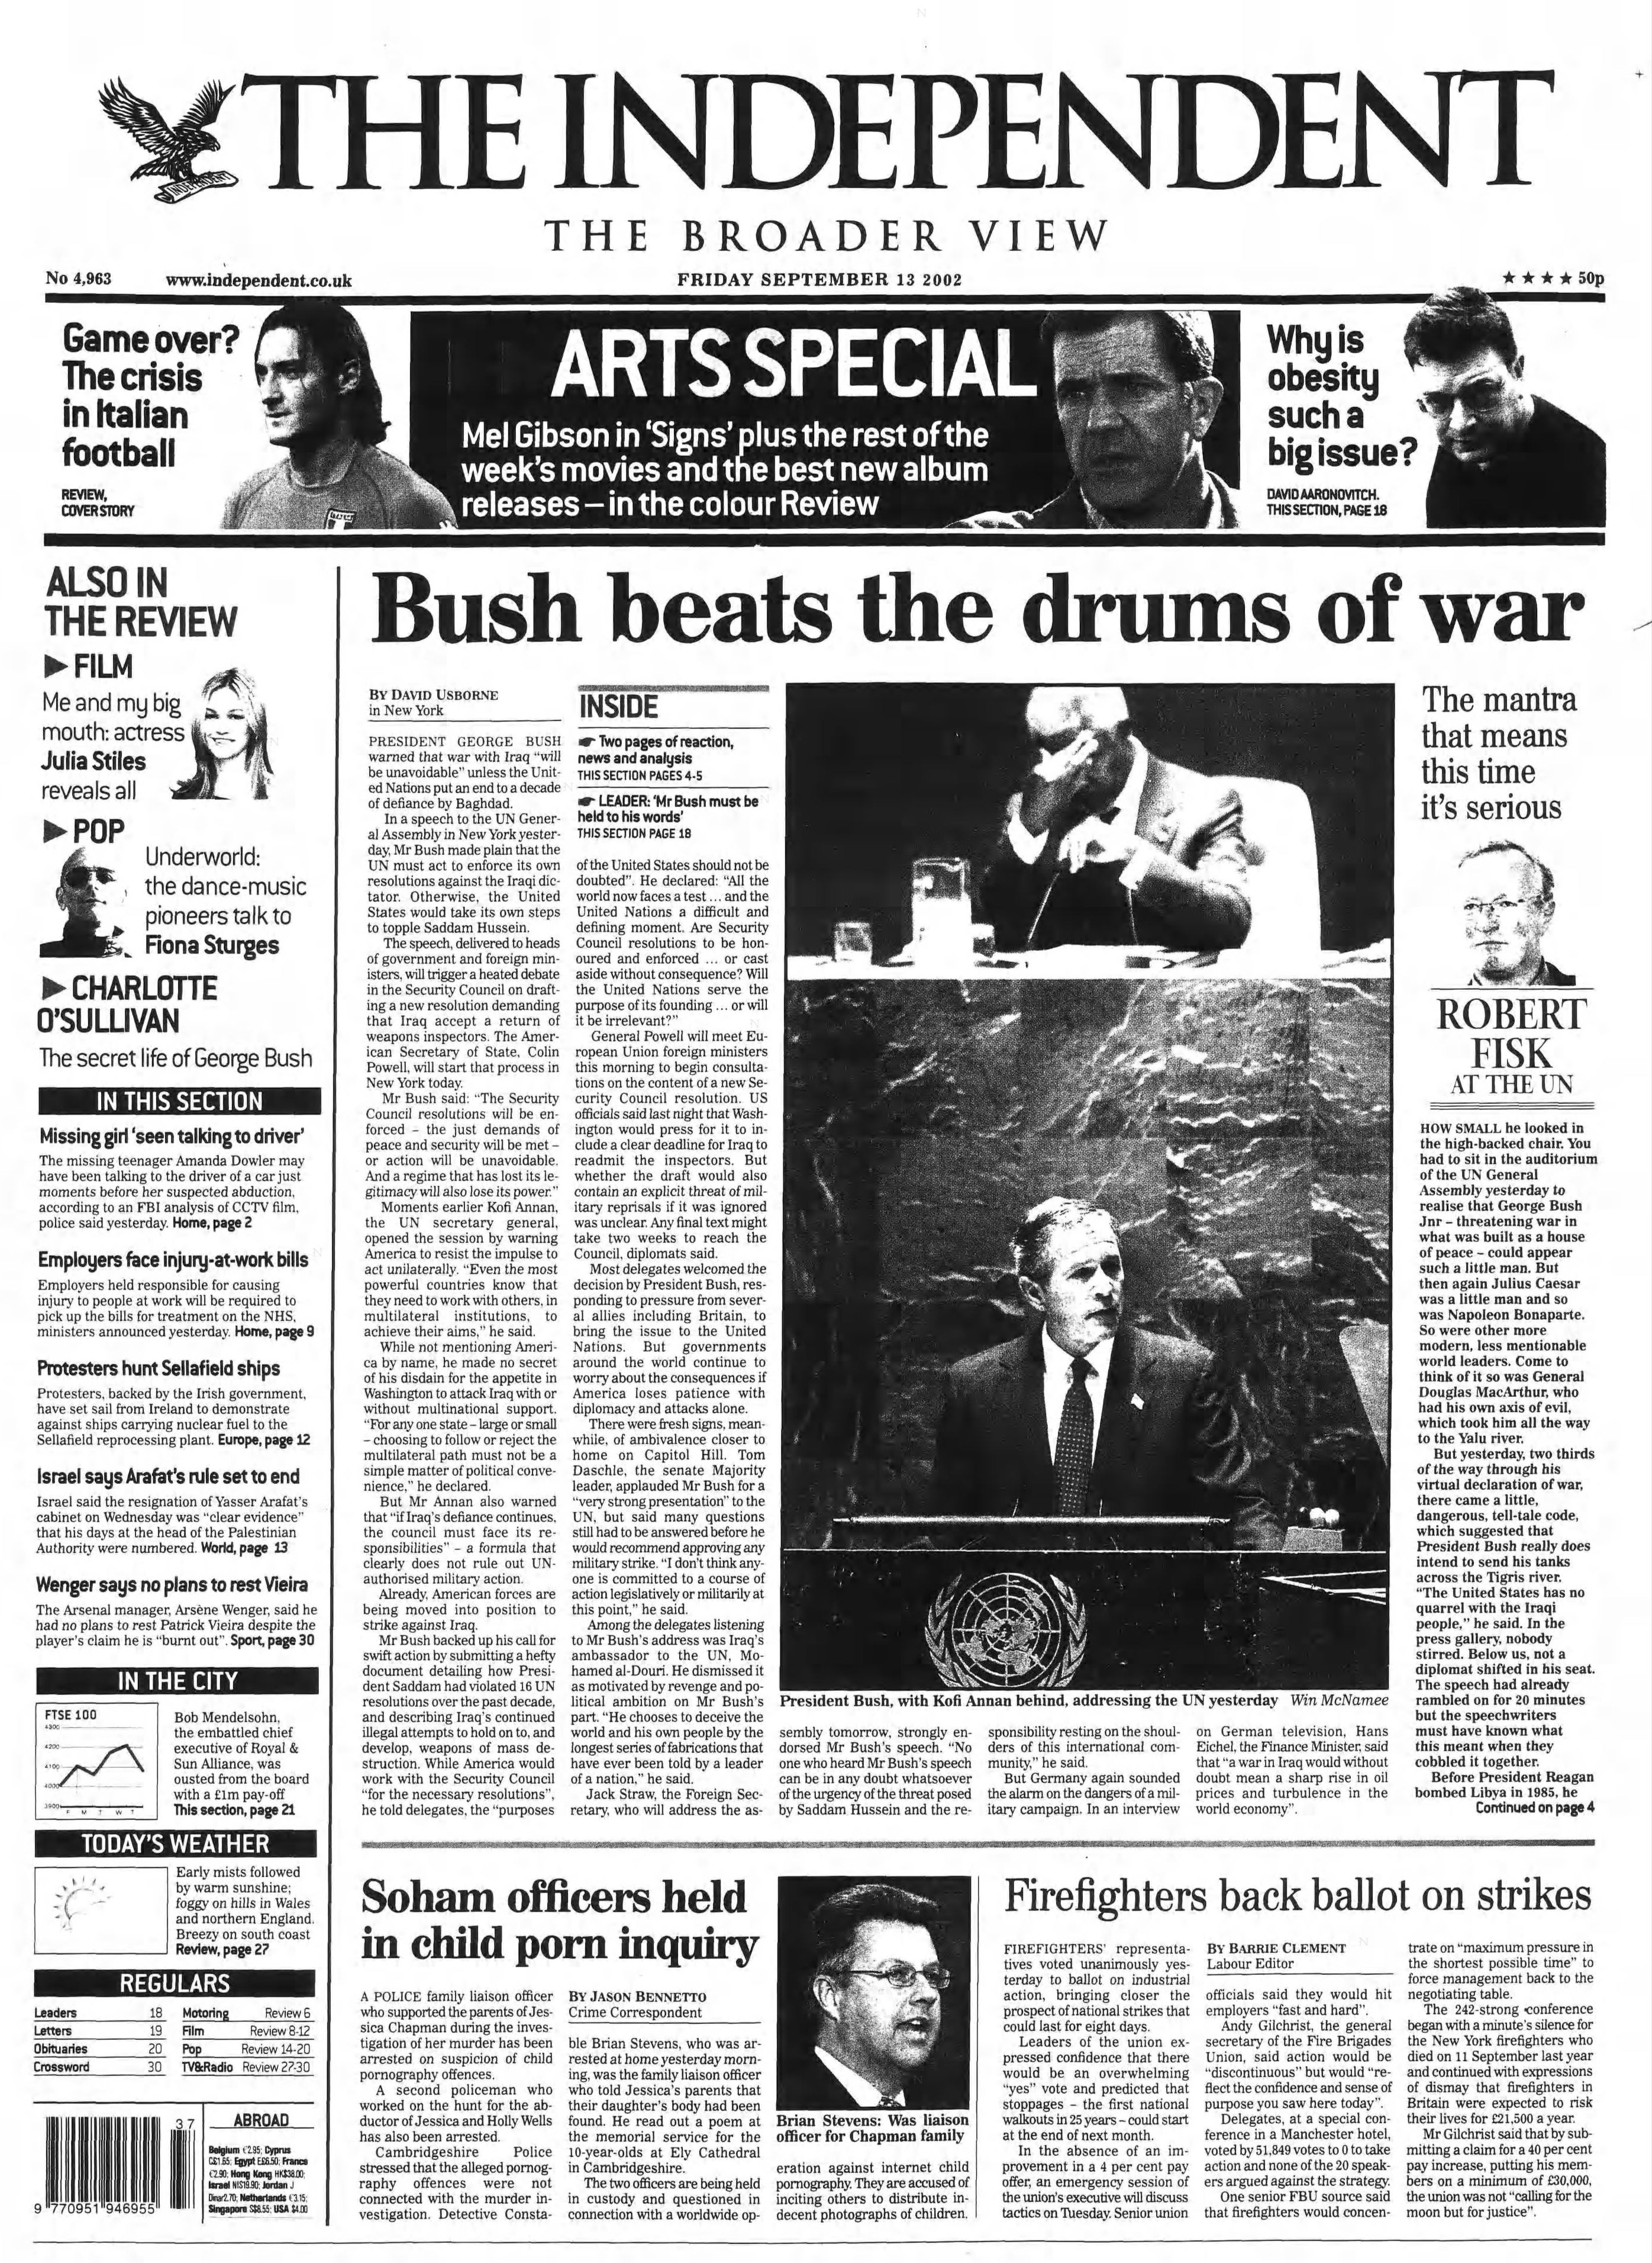 The Independent front page on 13 September 2002